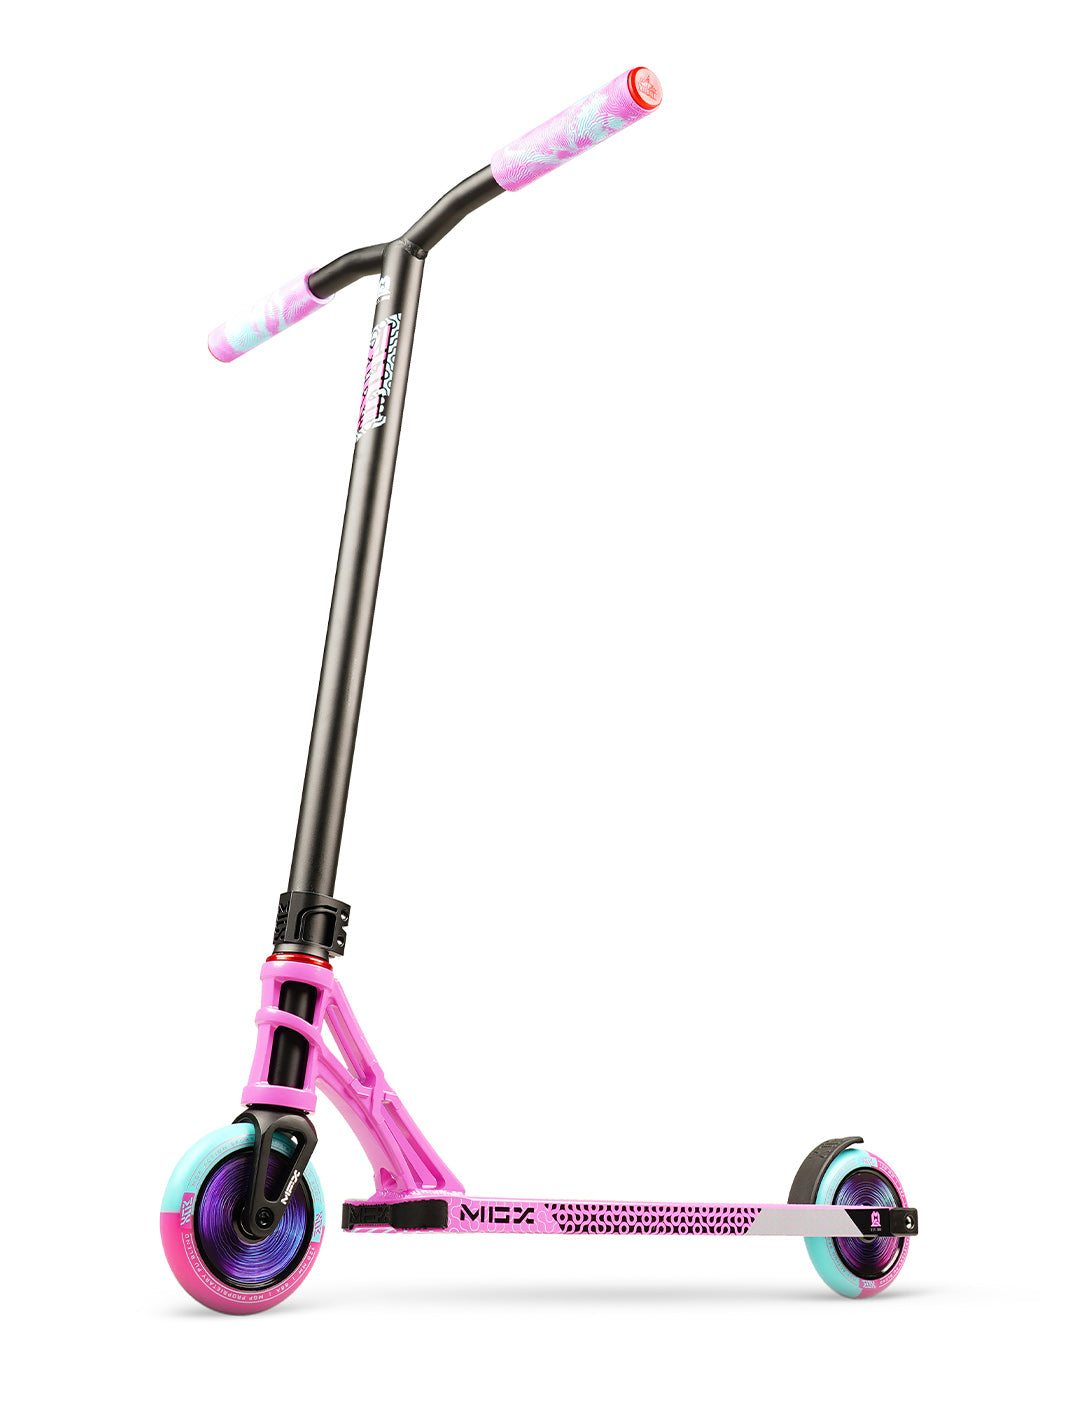 Madd Gear MGP MGX Pro P2 Stunt Scooter Pink Teal Complete Lightest